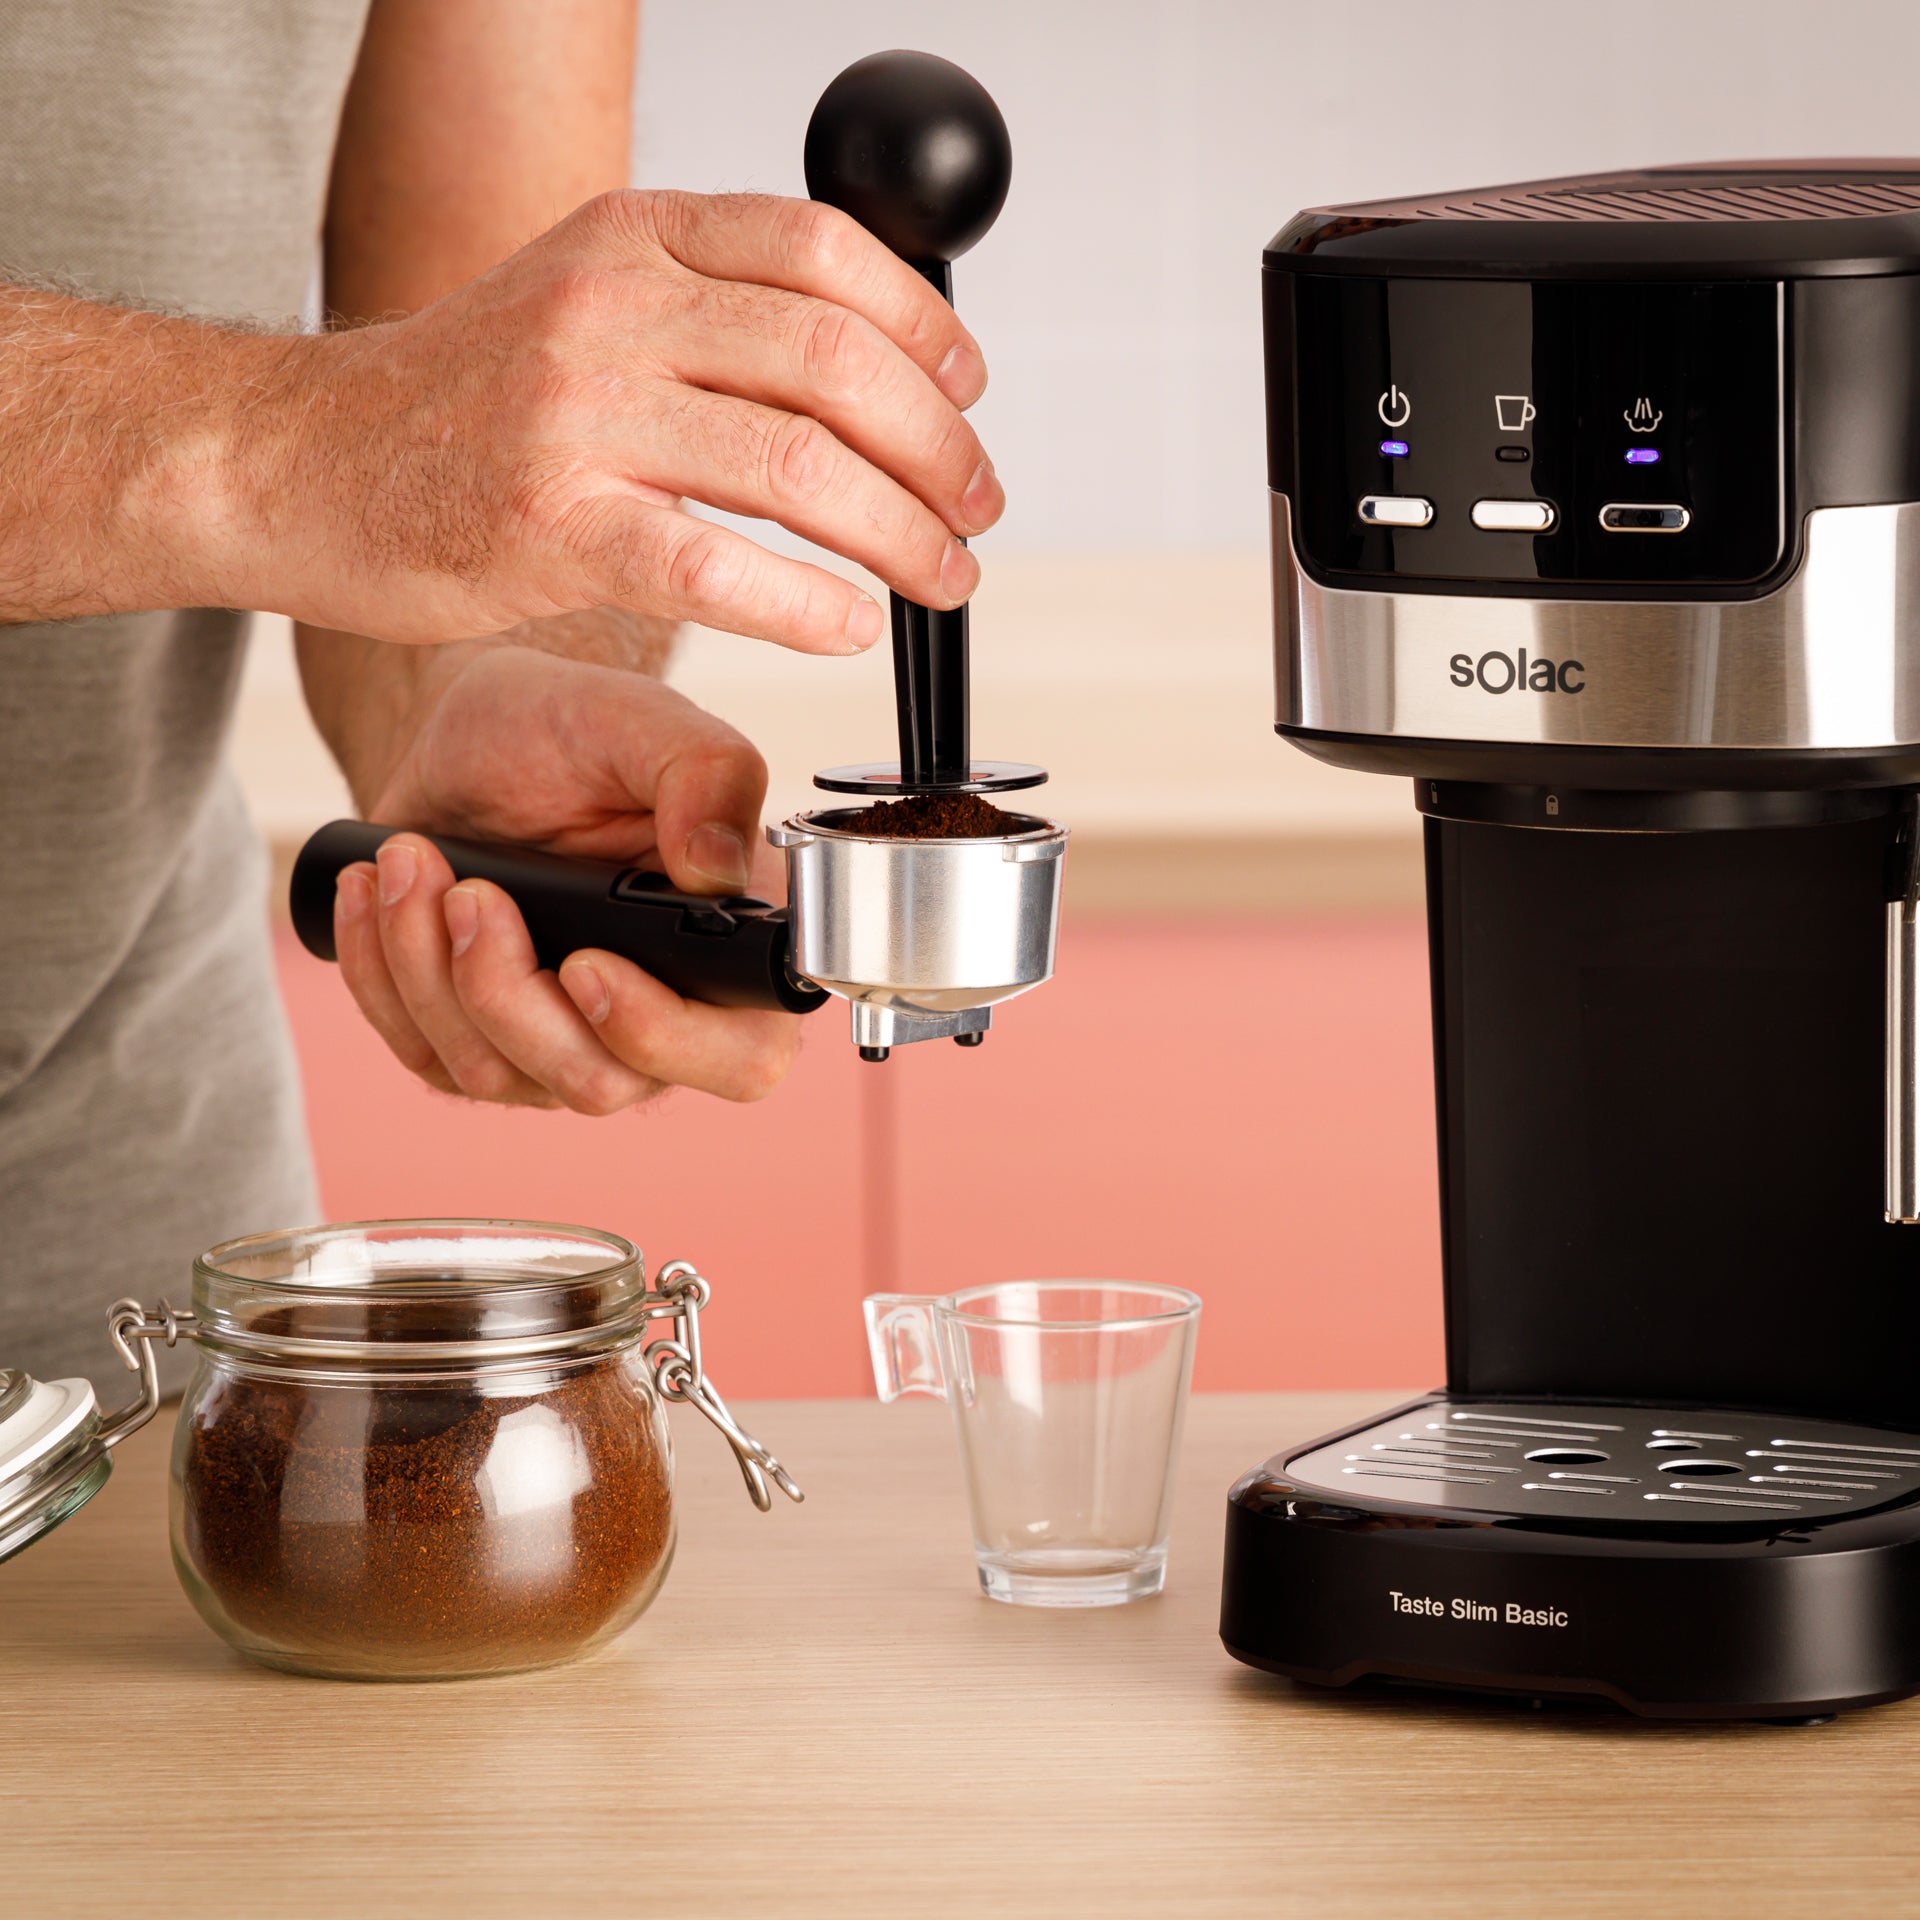 Cafetera expresso Solac Automatic coffeemaker en